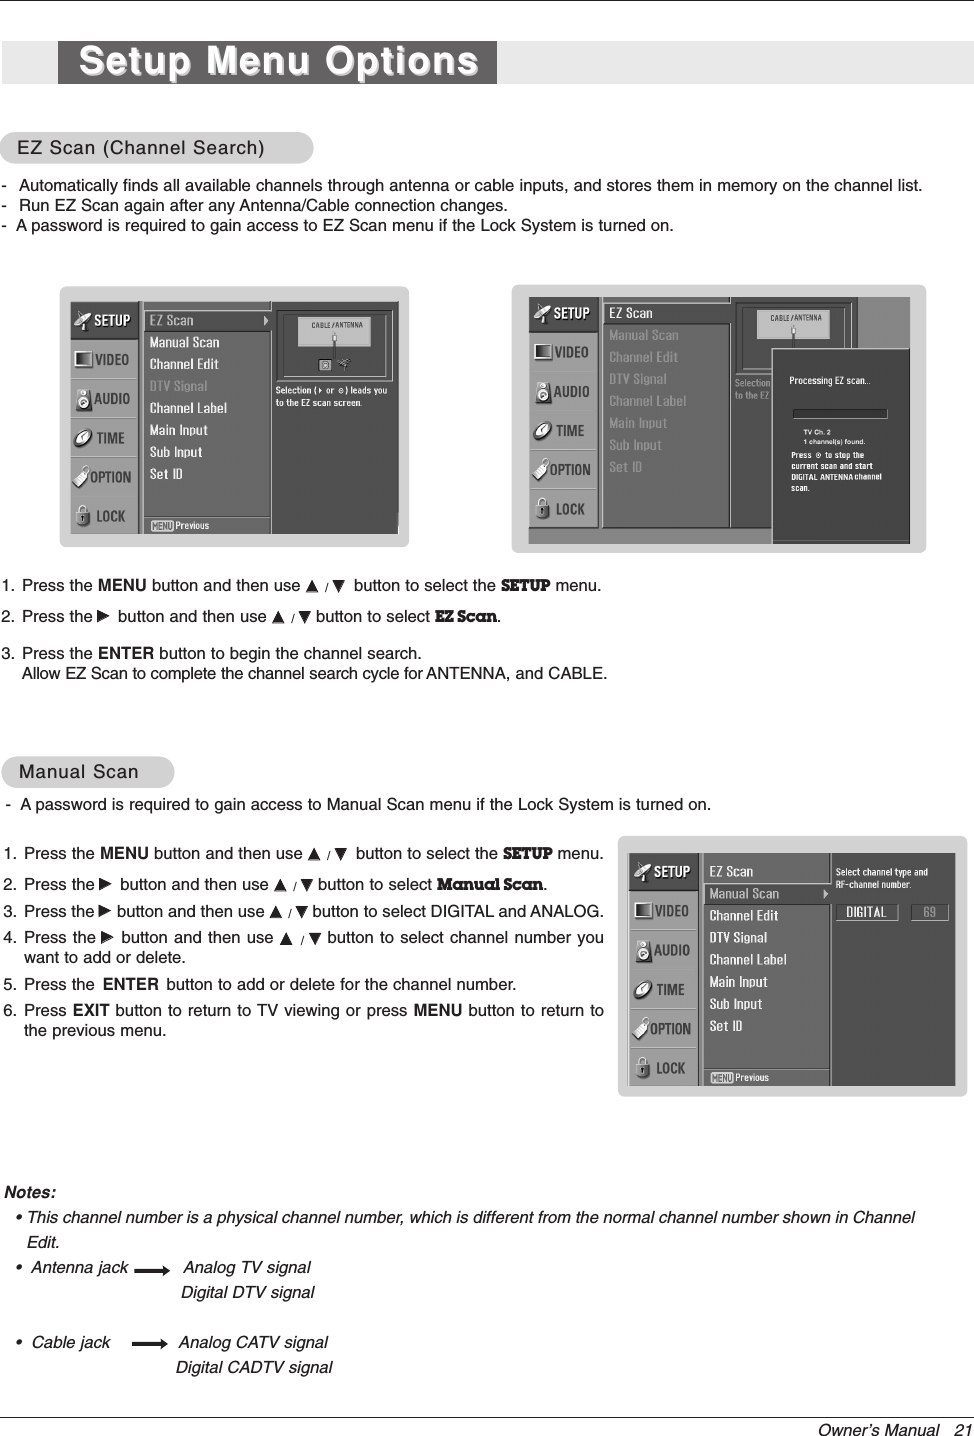 Owner’s Manual   21- Automatically finds all available channels through antenna or cable inputs, and stores them in memory on the channel list.- Run EZ Scan again after any Antenna/Cable connection changes.-  A password is required to gain access to EZ Scan menu if the Lock System is turned on.1. Press the MENU button and then use DD  / EEbutton to select the SETUP menu.2. Press the GGbutton and then use DD  / EEbutton to select EZ Scan.3. Press the ENTER button to begin the channel search.Allow EZ Scan to complete the channel search cycle for ANTENNA, and CABLE.EZ Scan (Channel Search)EZ Scan (Channel Search)1. Press the MENU button and then use DD  / EEbutton to select the SETUP menu.2. Press the GGbutton and then use DD  / EEbutton to select Manual Scan.3. Press the GGbutton and then use DD  / EEbutton to select DIGITAL and ANALOG.4. Press the GGbutton and then use DD  / EEbutton to select channel number youwant to add or delete.5. Press the ENTER button to add or delete for the channel number.6. Press EXIT button to return to TV viewing or press MENU button to return tothe previous menu.Manual ScanManual ScanNotes:• This channel number is a physical channel number, which is different from the normal channel number shown in ChannelEdit.•  Antenna jack           Analog TV signalDigital DTV signal•  Cable jack  Analog CATV signalDigital CADTV signalSetup Menu OptionsSetup Menu Options-  A password is required to gain access to Manual Scan menu if the Lock System is turned on.